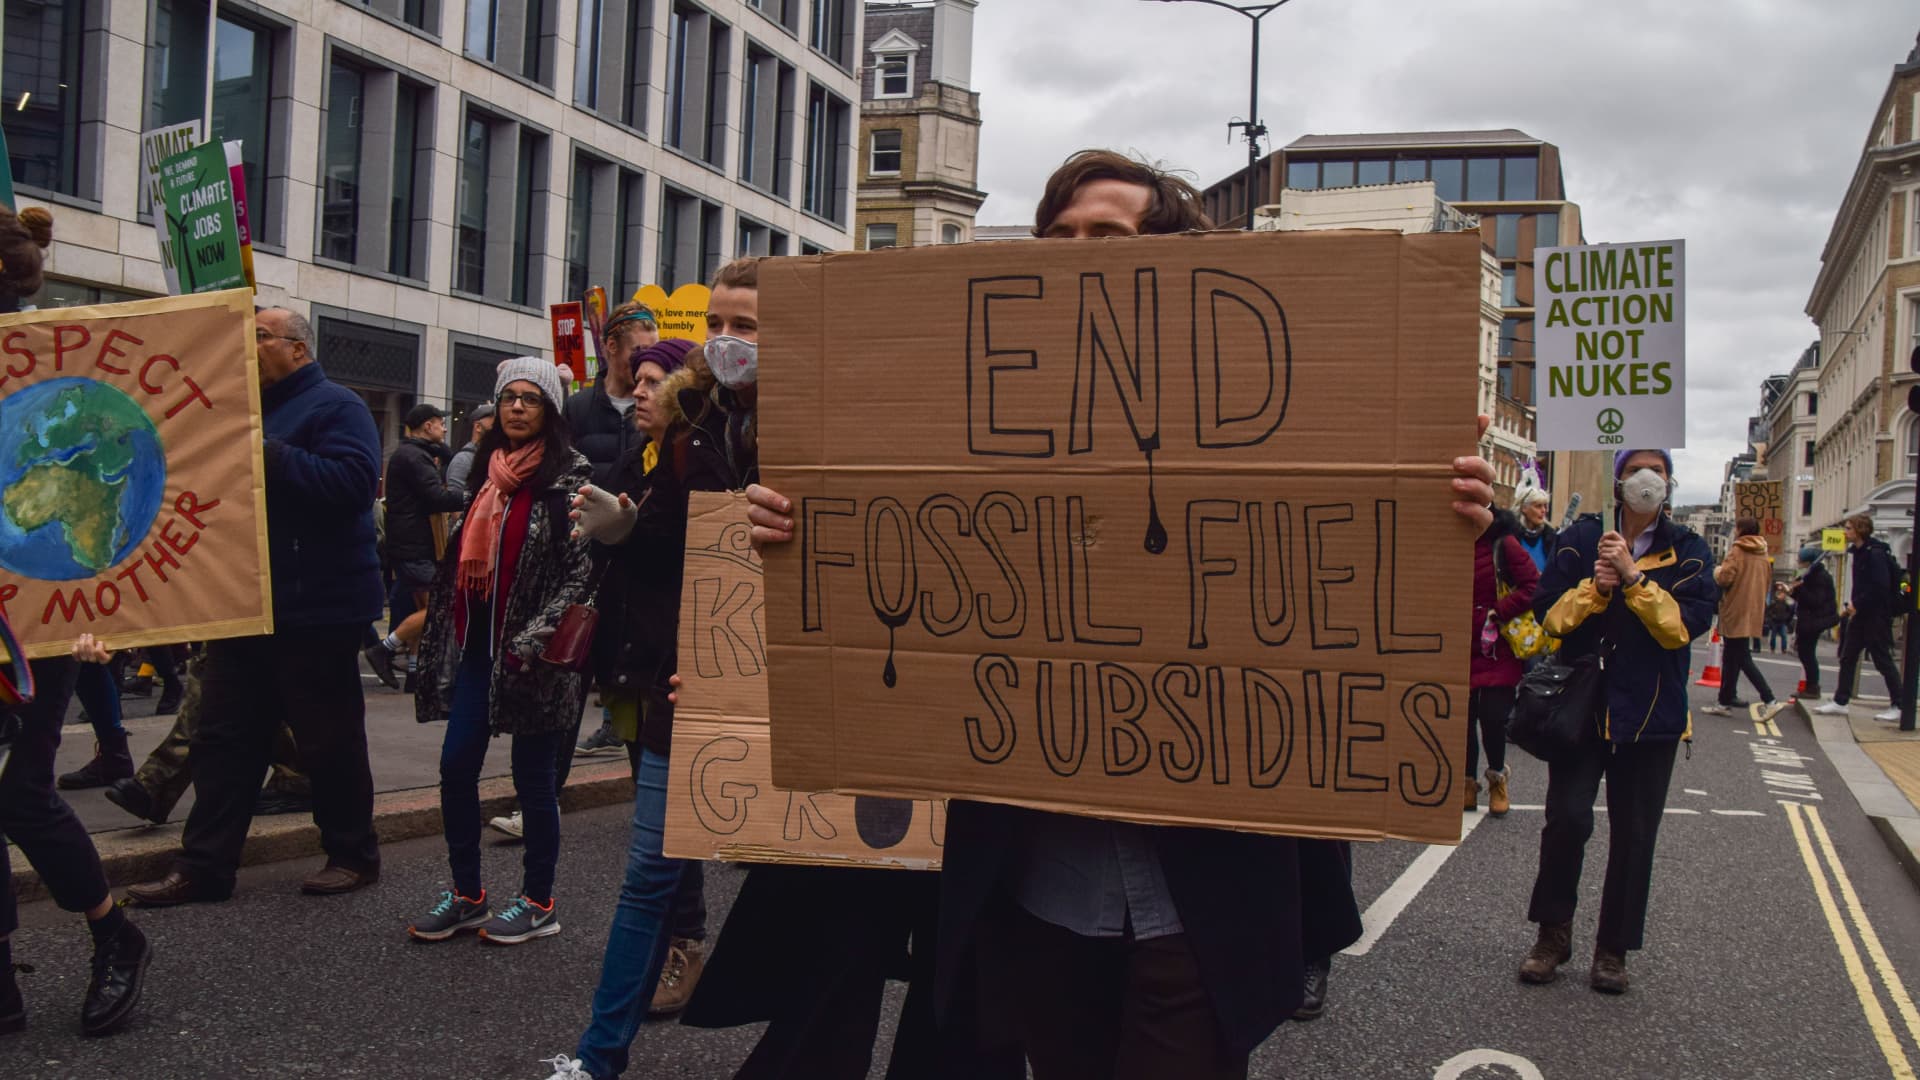 A protester holds an 'End Fossil Fuel Subsidies' placard during the demonstration in the City of London.